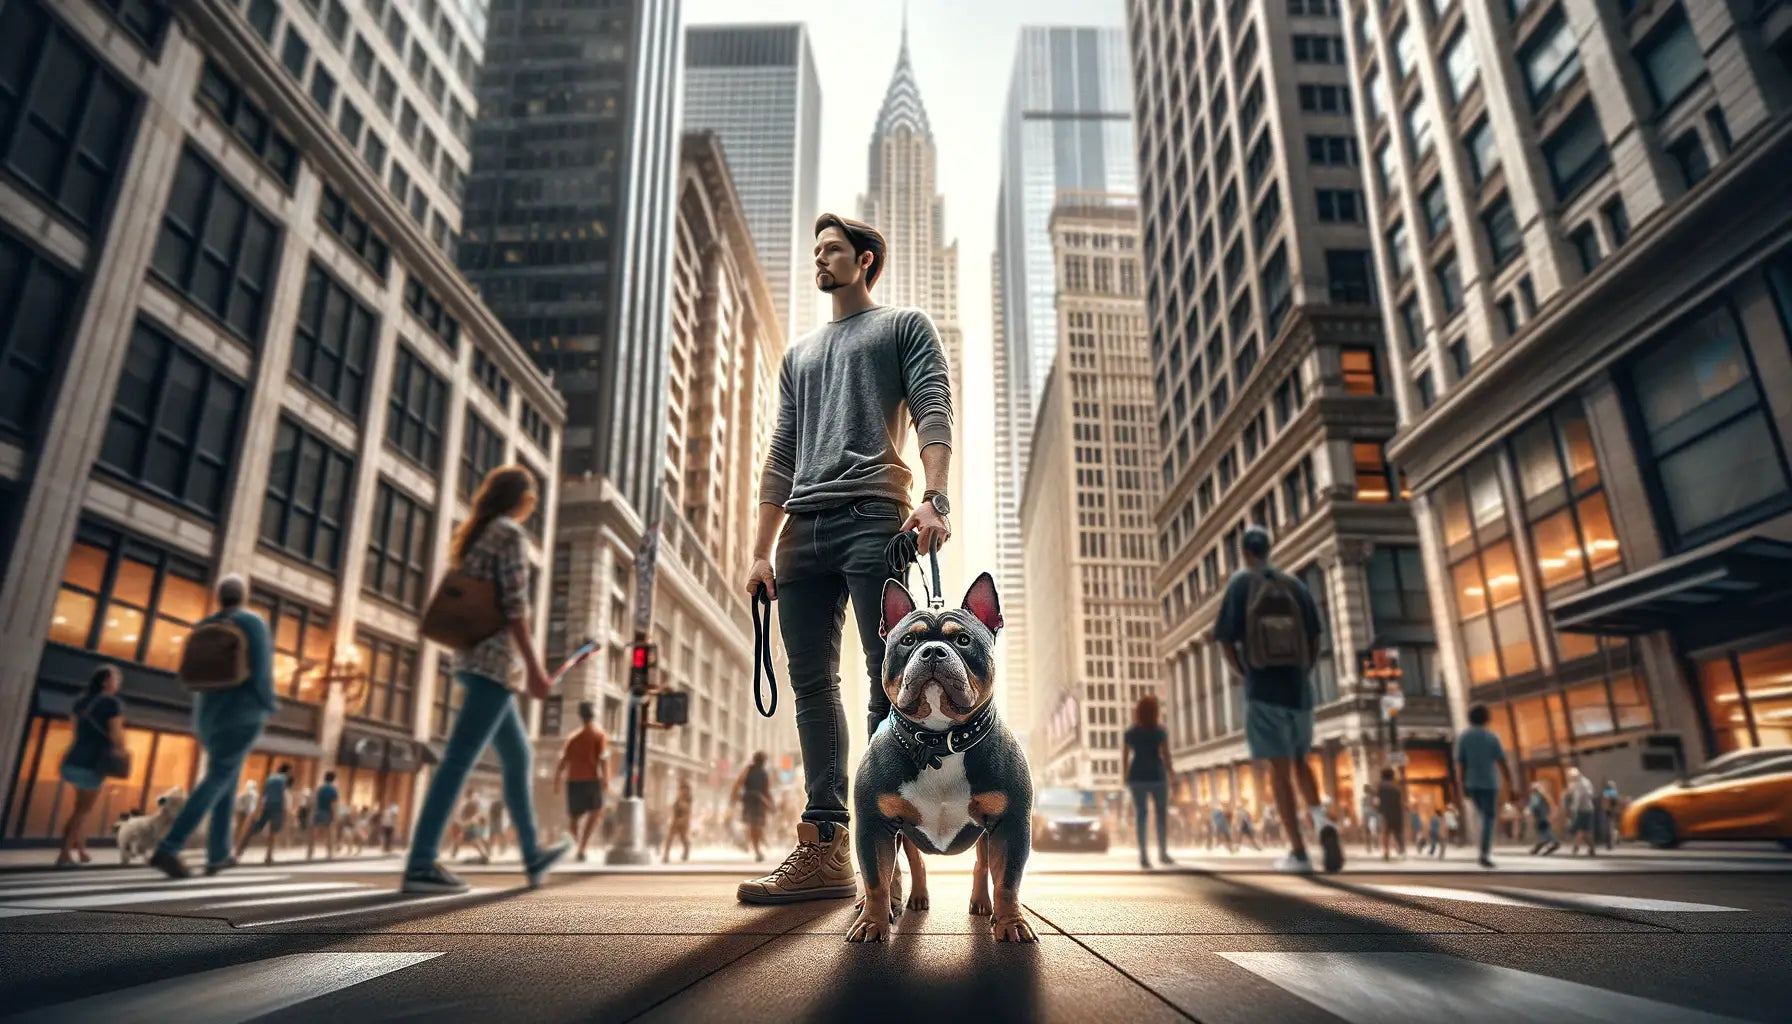 An urban scene with a Pocket Bully on a leash, showing how they adapt to city living